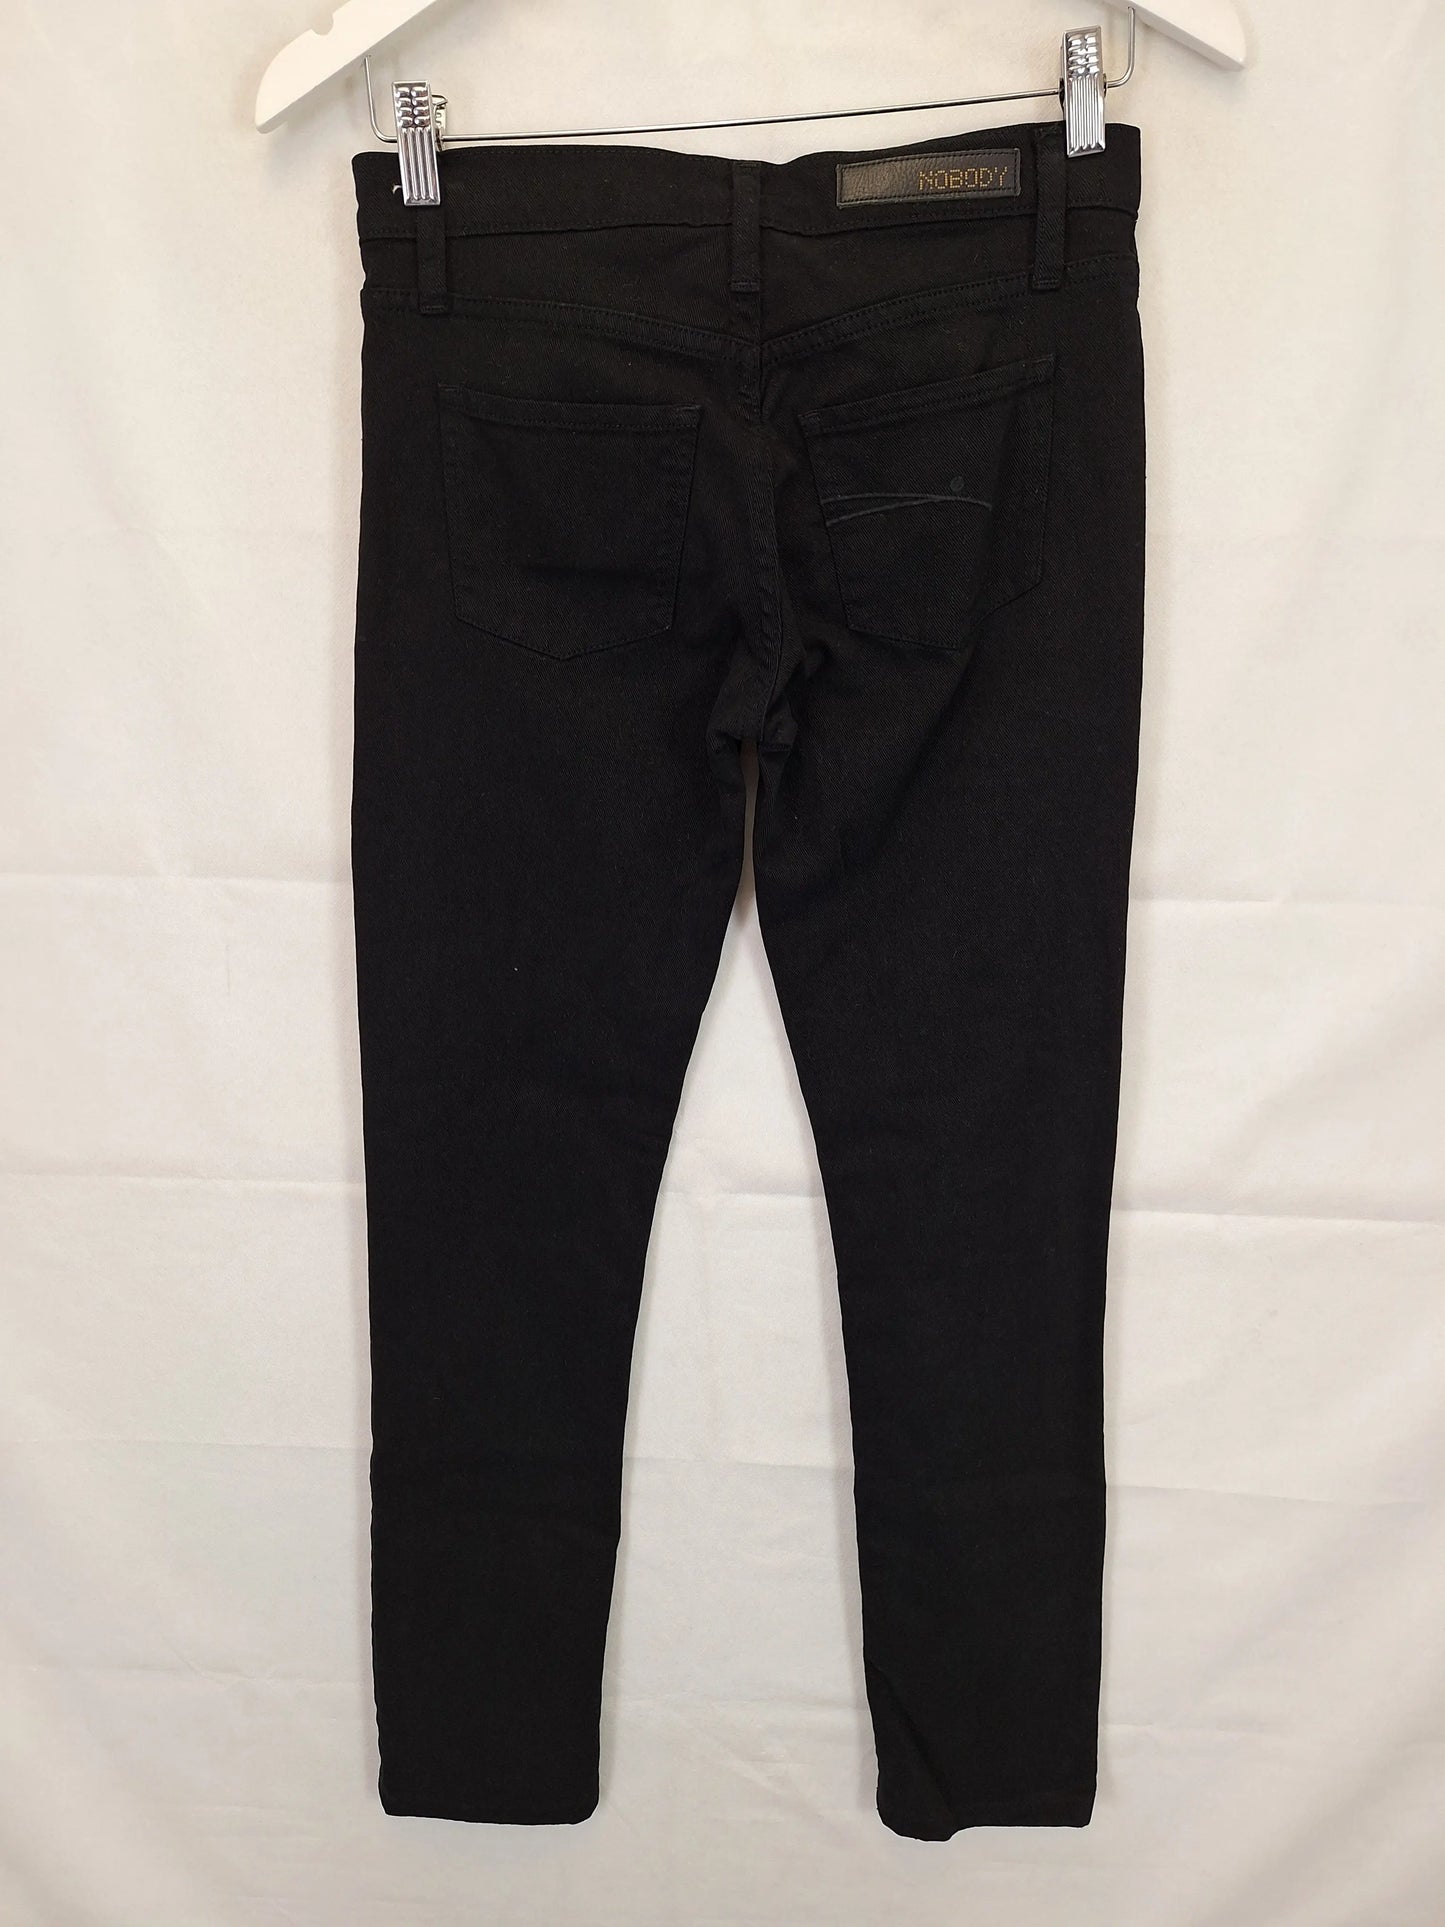 Nobody Mid Rise Straight Led Denim Jeans Size 8 by SwapUp-Online Second Hand Store-Online Thrift Store